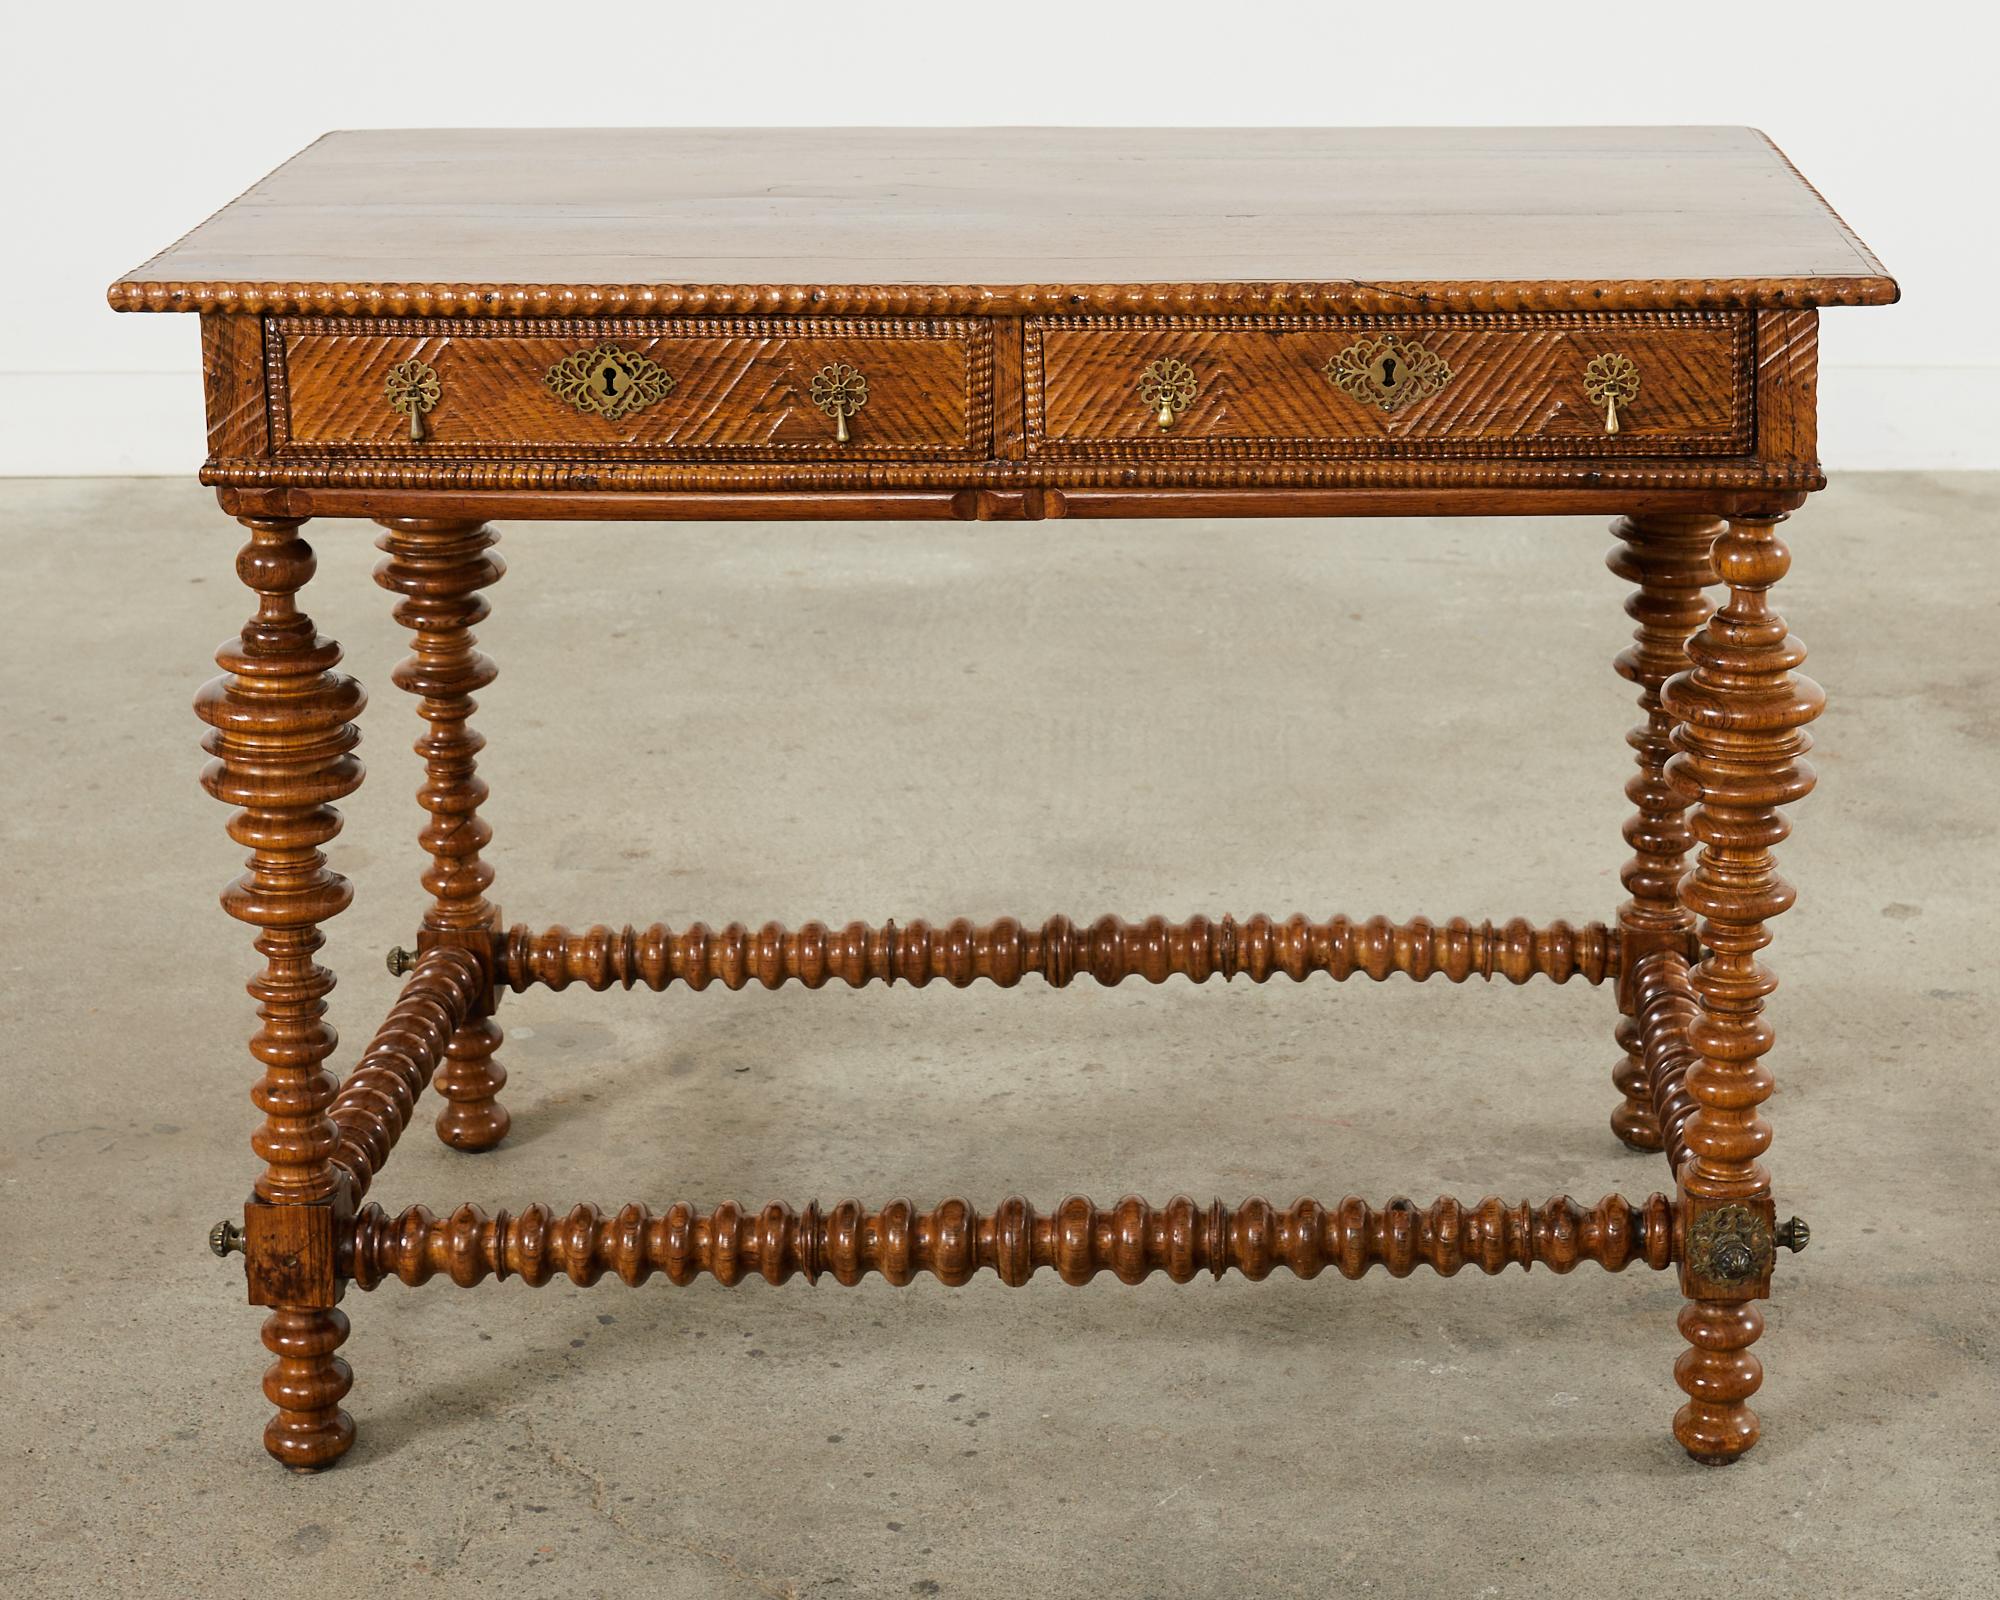 Hand-Crafted 17th Century Portuguese Baroque Rosewood Library Center Table